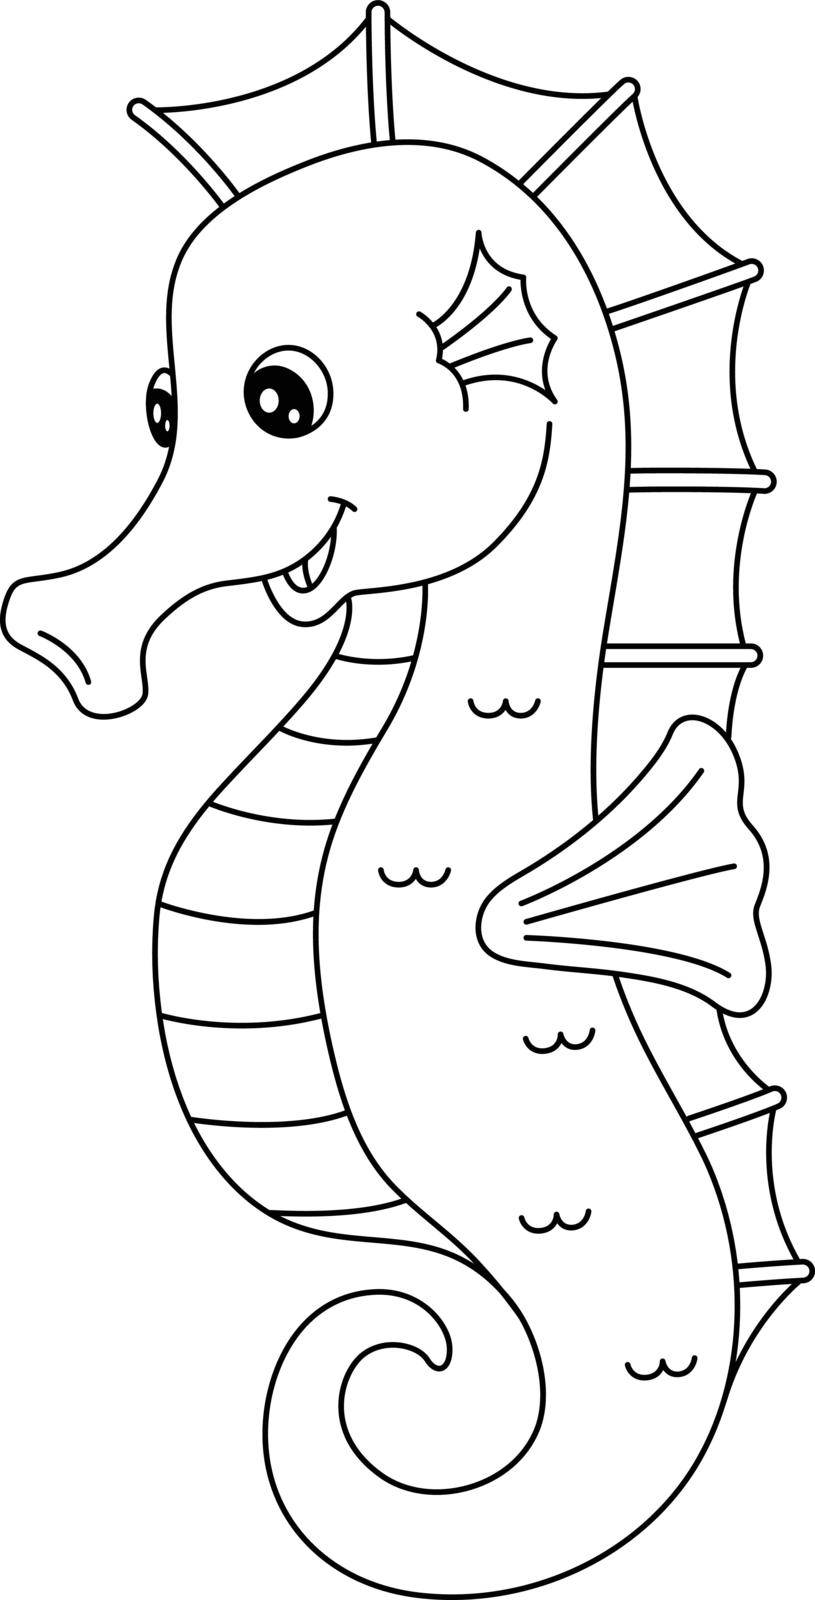 Seahorse Coloring Page Isolated for Kids by abbydesign